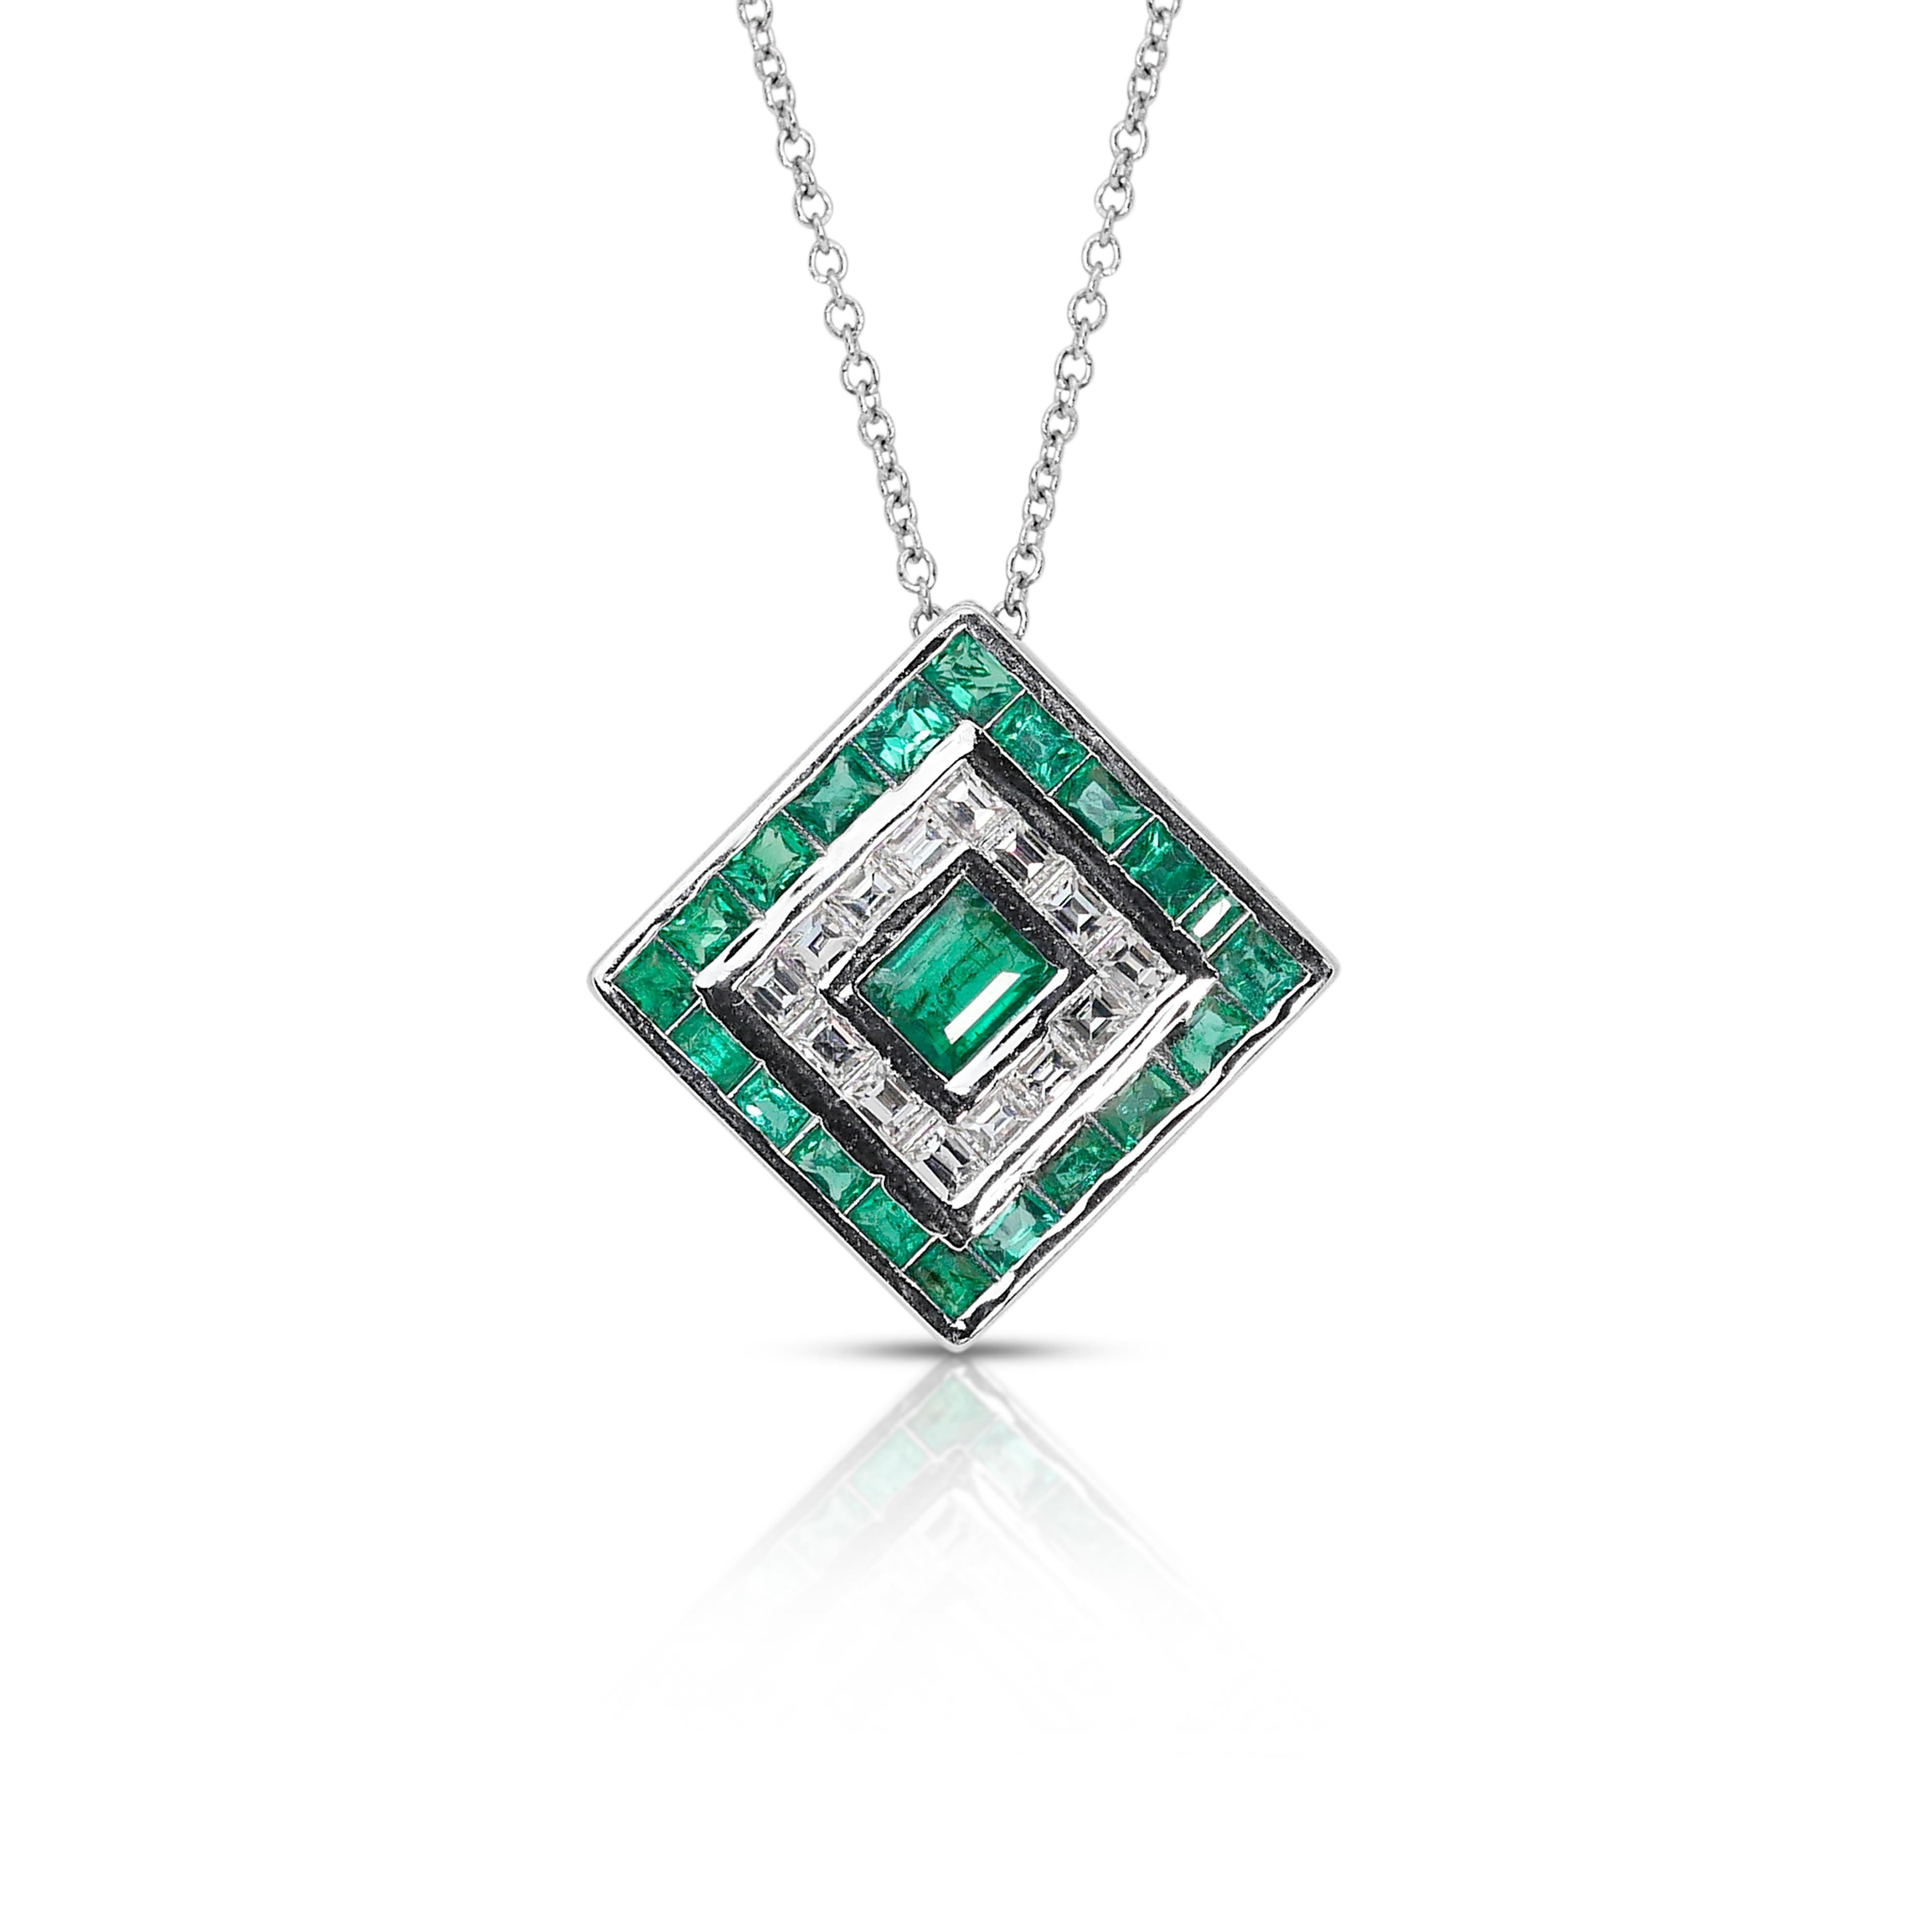 Captivating 1.45ct Emeralds and Diamonds Halo Necklace in 14k White Gold - IGI Certified

This exquisite halo necklace crafted in 14k white gold features a captivating line of 21 rectangular emeralds, with a total carat weight of 1.03 carat, and